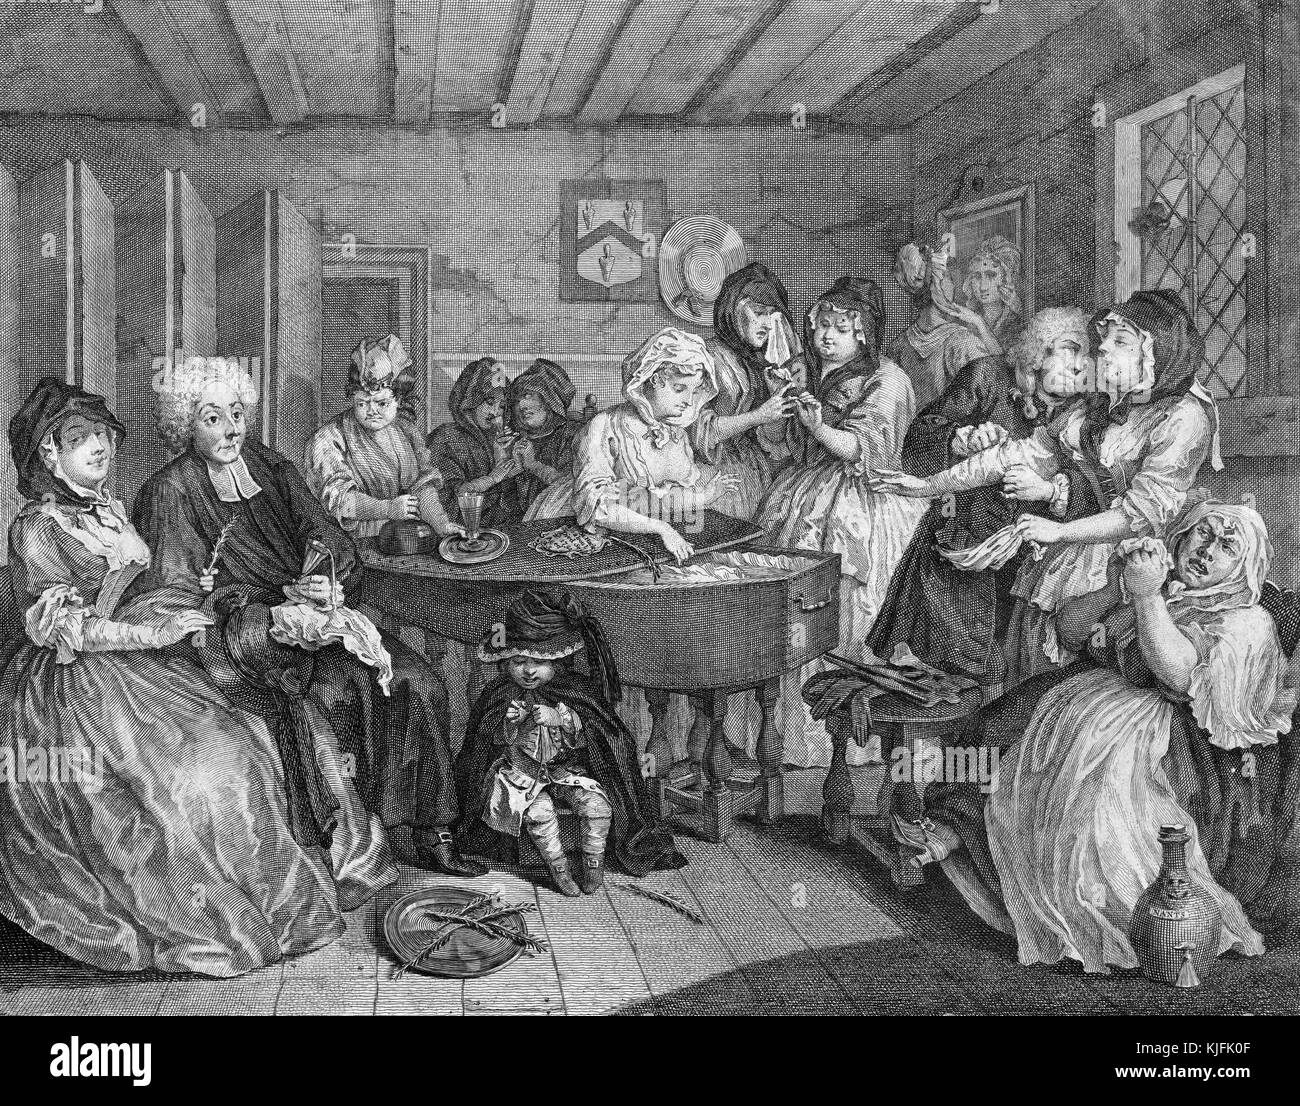 Engraving on paper, titled 'A Harlot's Progress, Plate 6, Moll's Wake', depicting a room full of women, some mourning, around an open coffin, most drinking, by William Hogarth, 1732. From the New York Public Library. Stock Photo